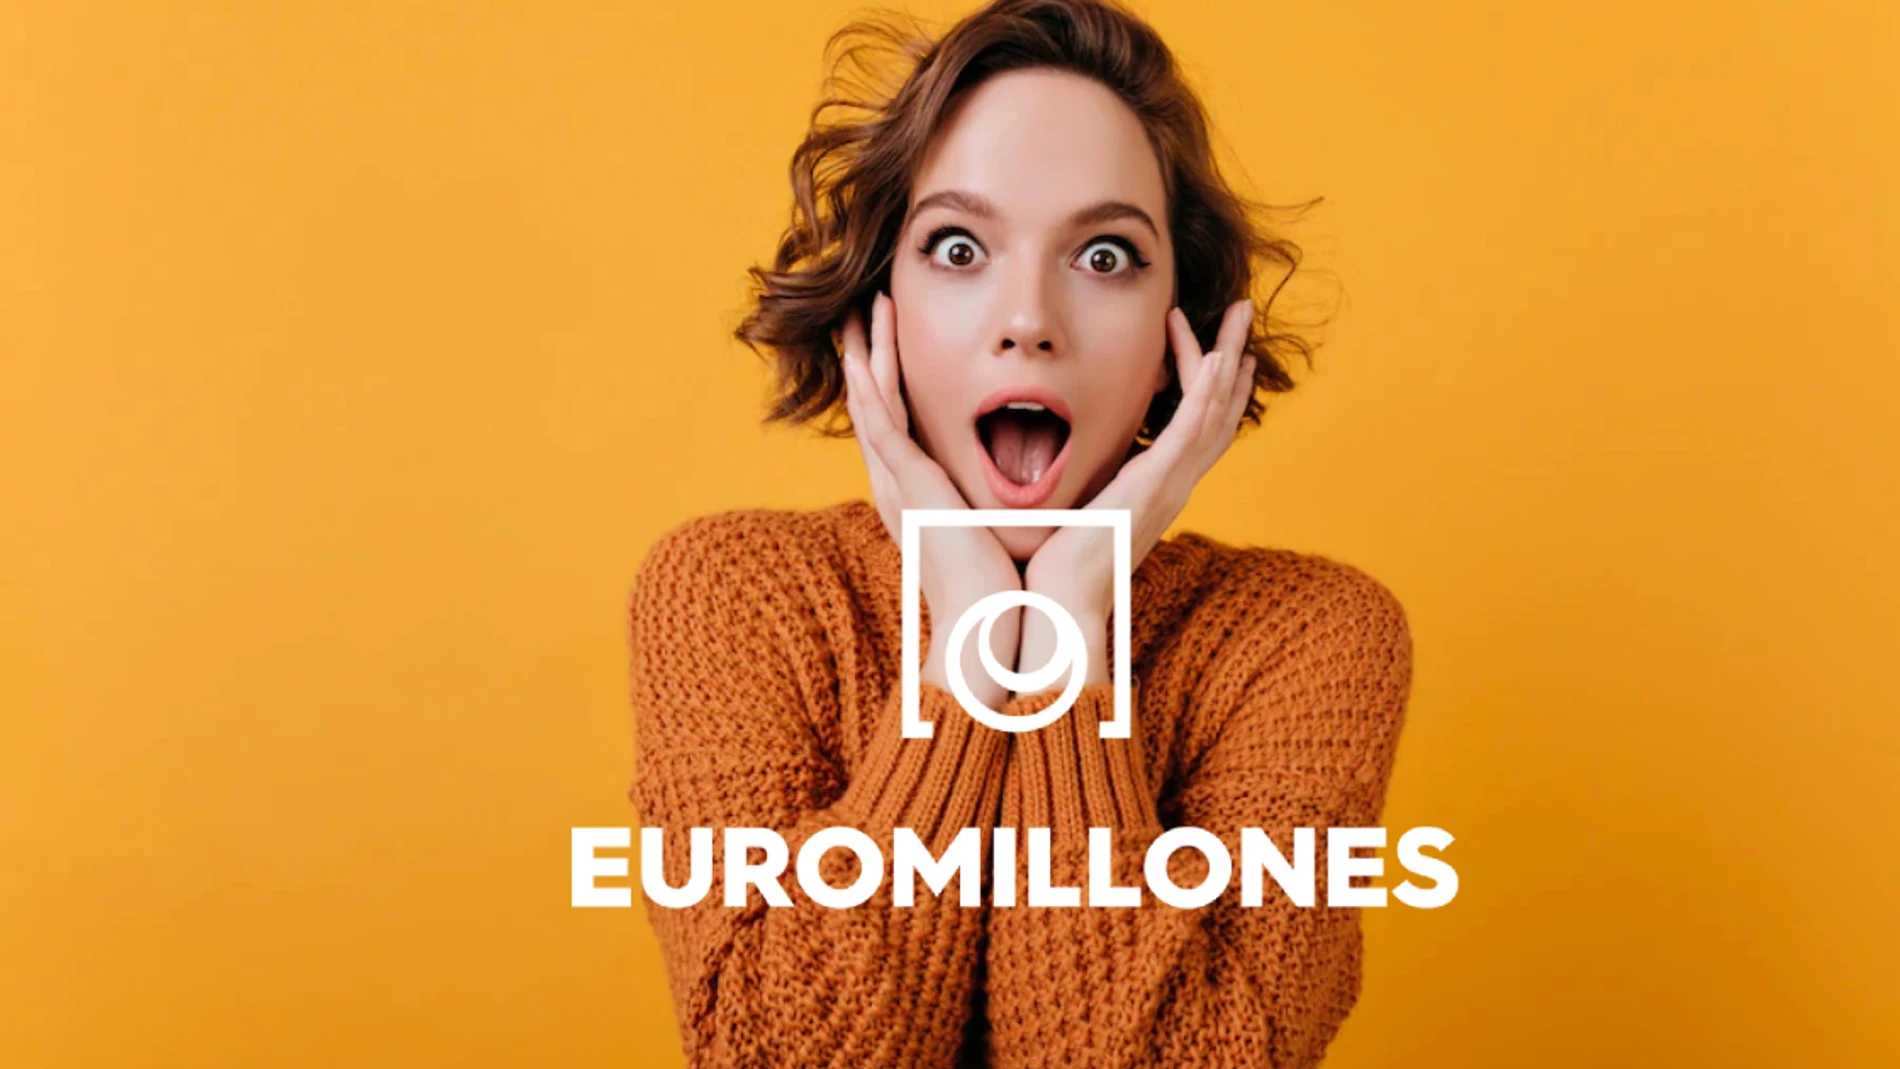 Euromillones